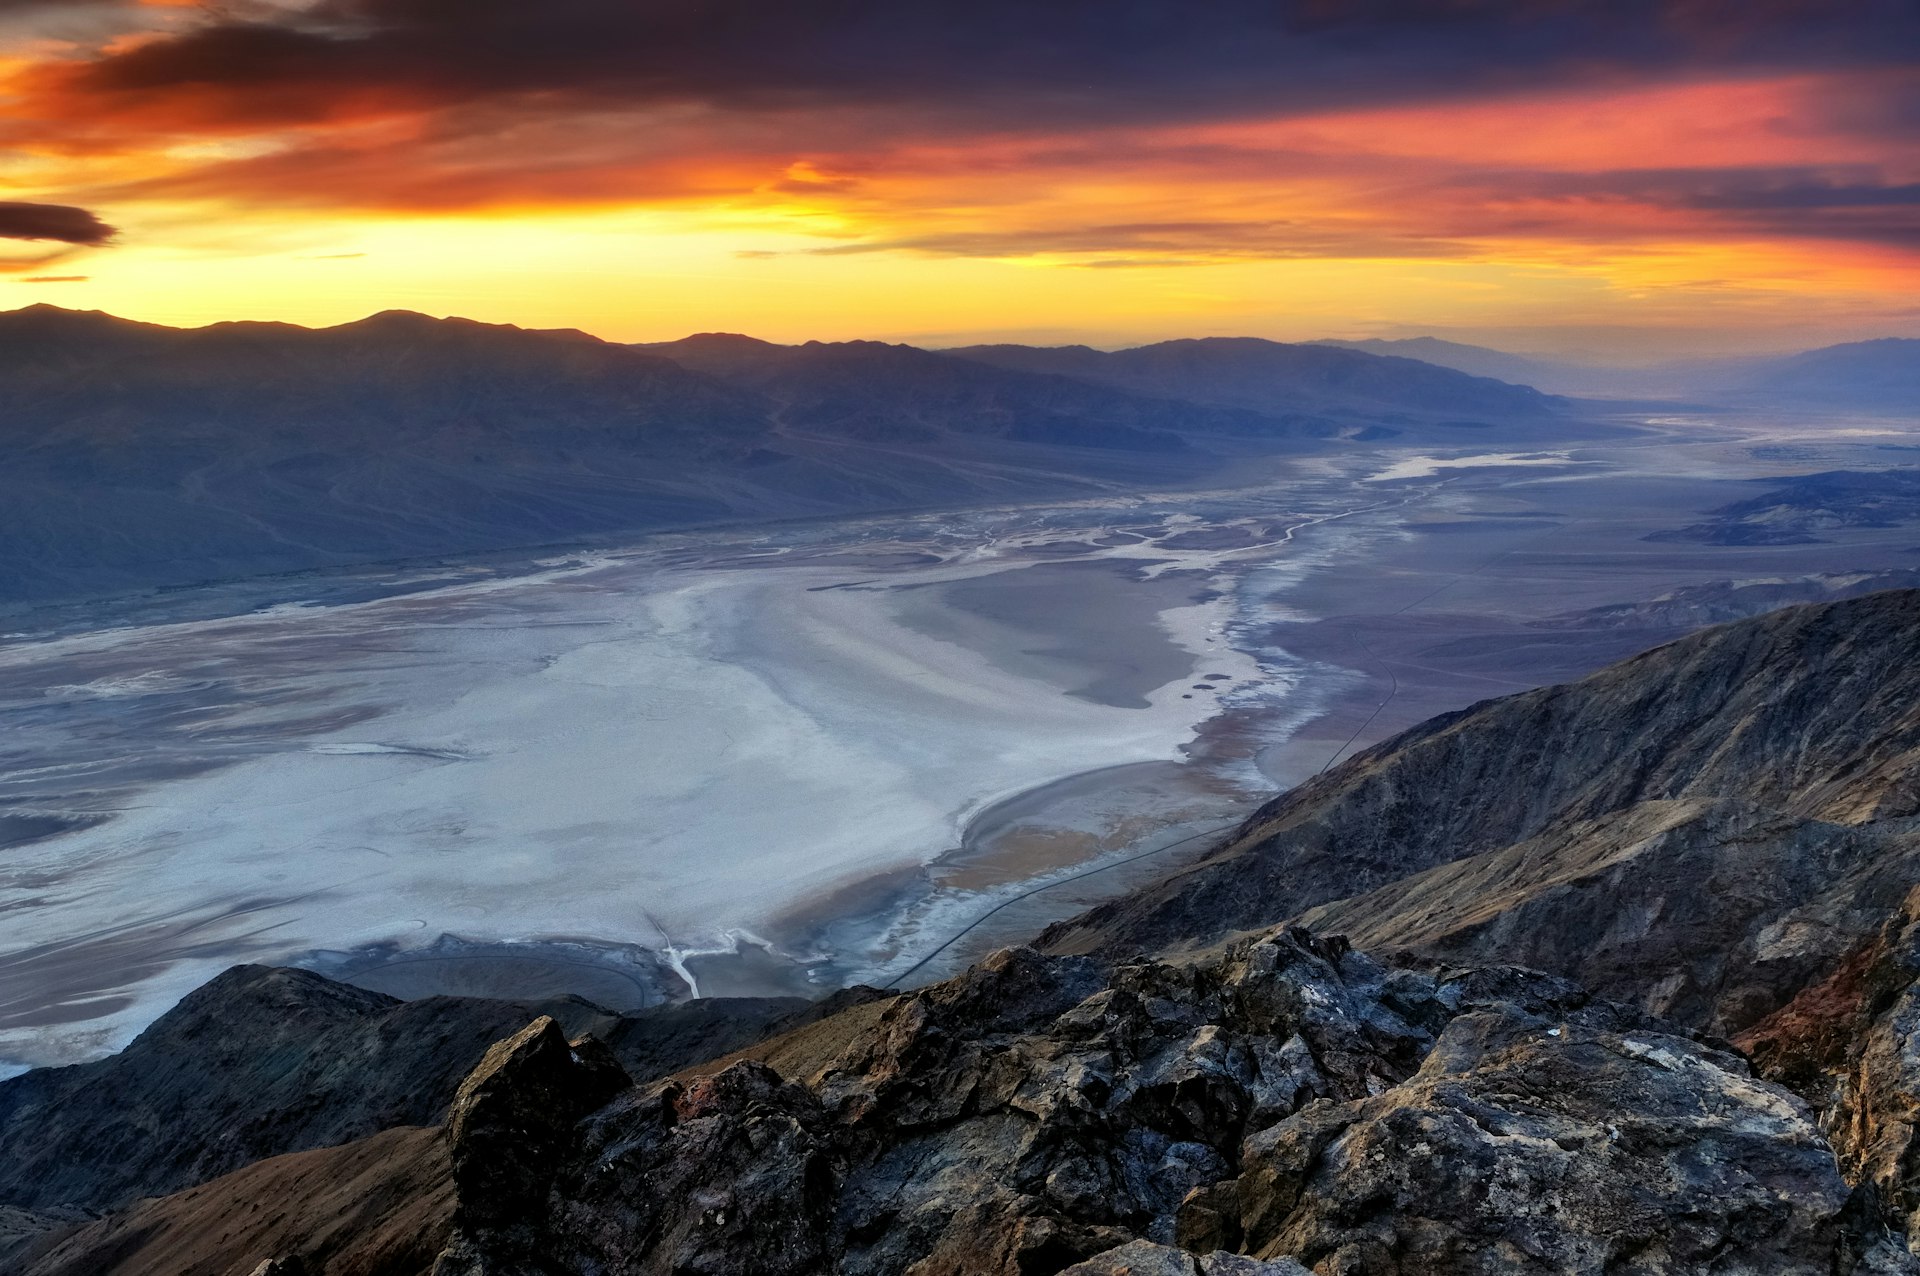 A valley of white salt flats surrounded by gray rocky hills and mountains. The sun is setting in the distance 